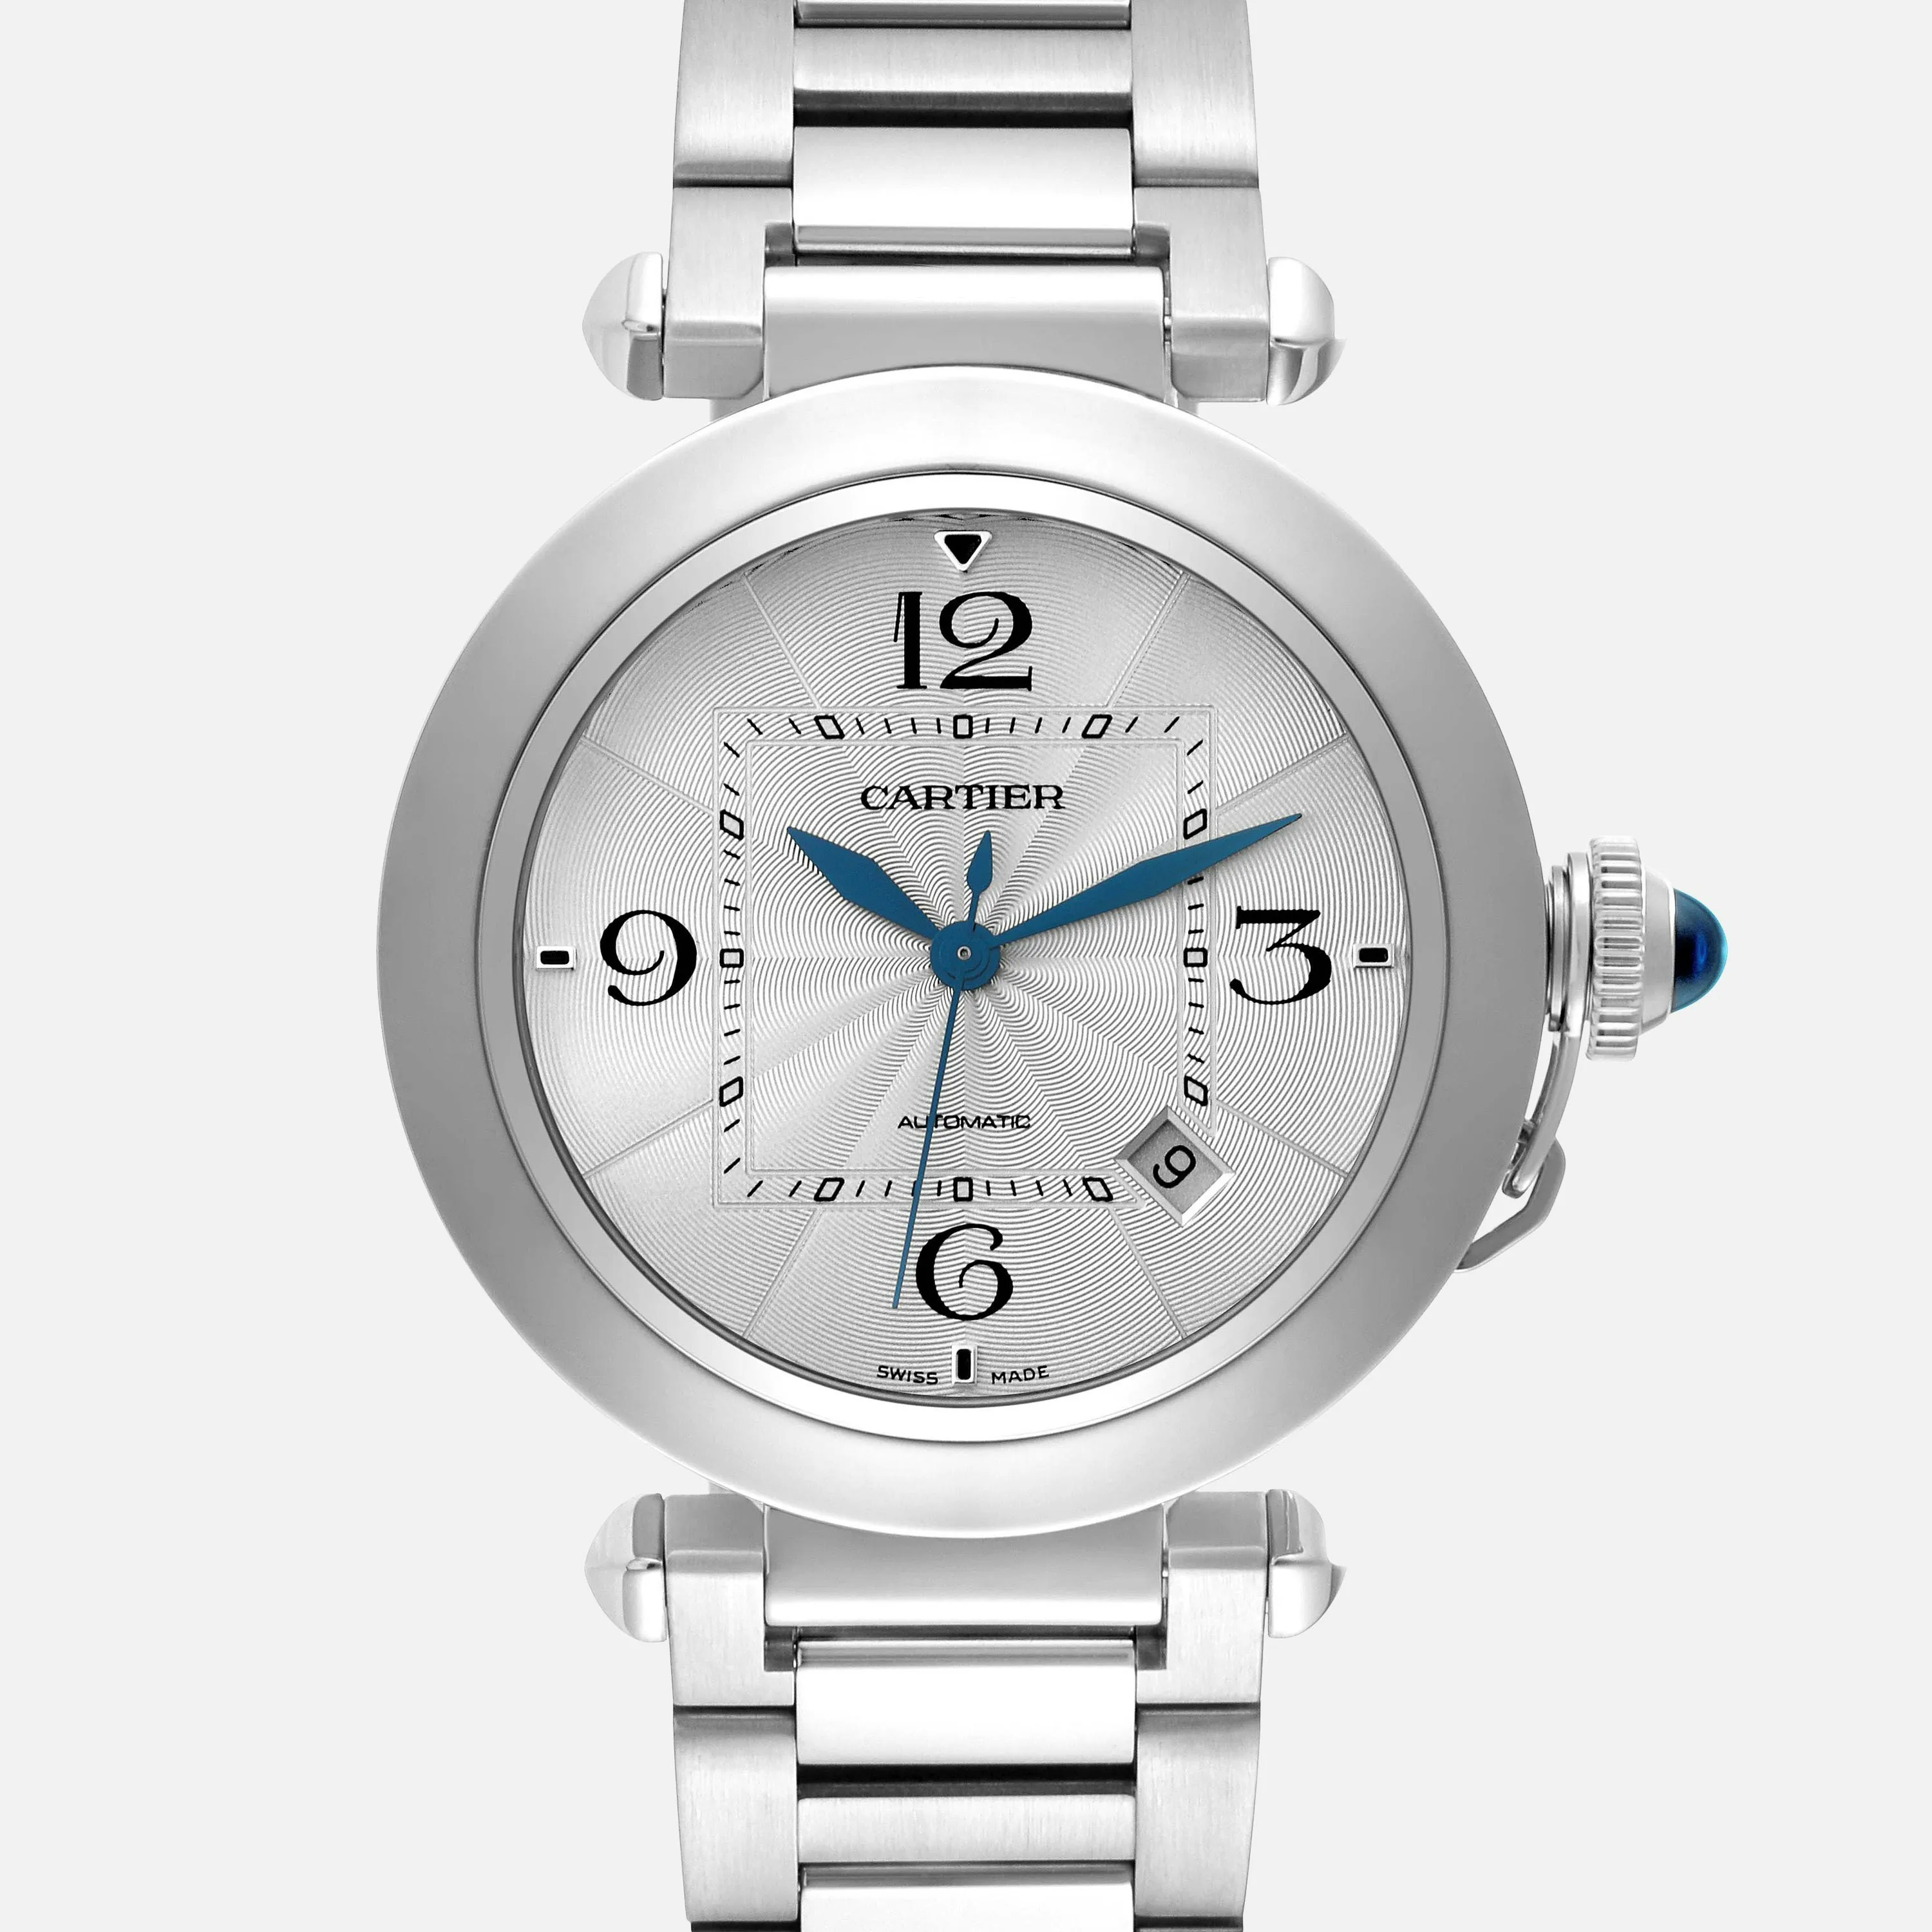 Cartier Pasha WSPA0009 41mm Stainless steel Silver